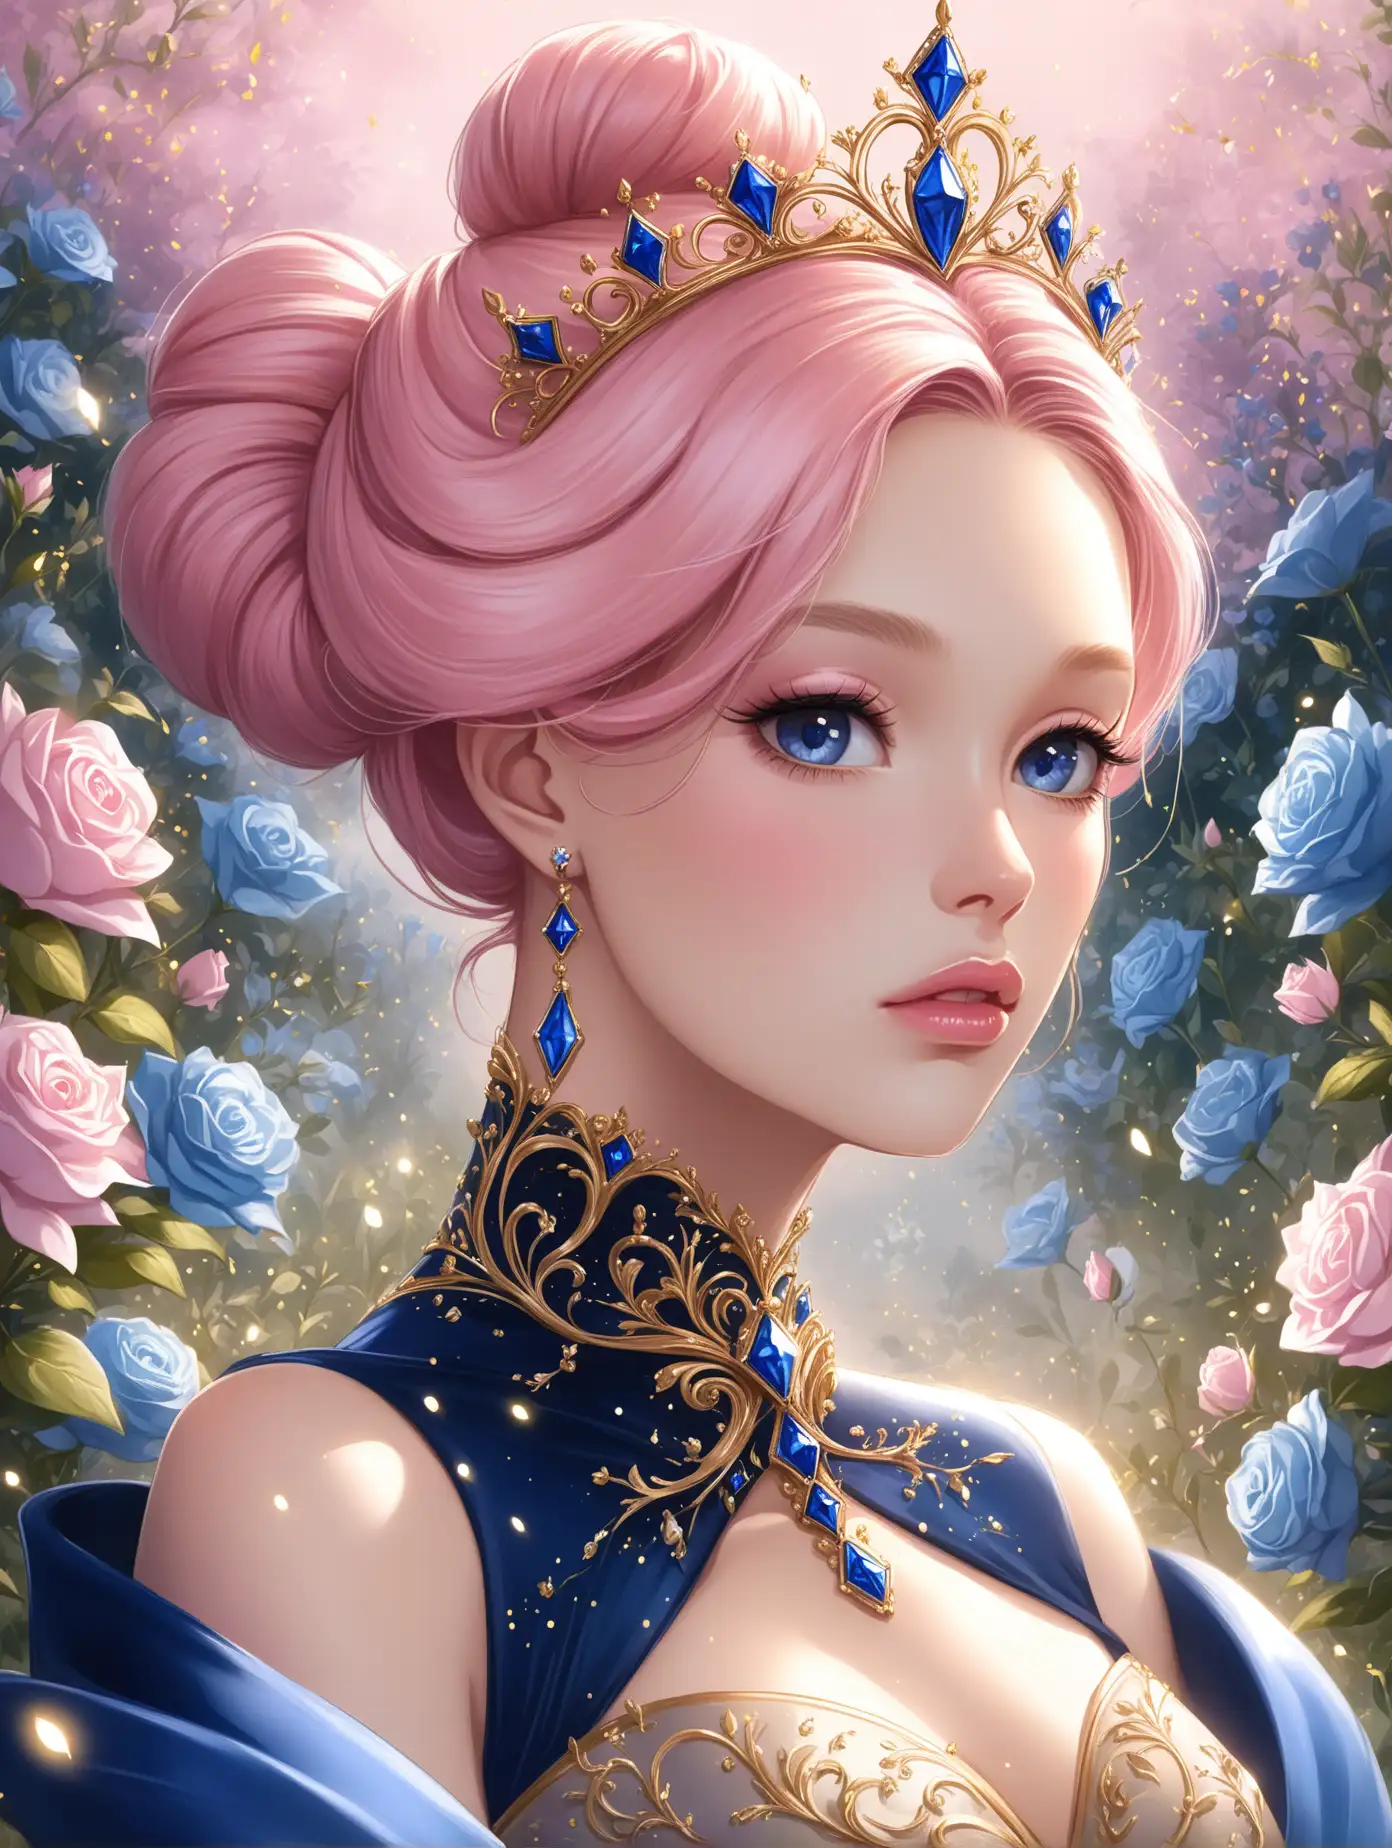 Enchanting Princess with Pink Hair in Garden of White and Blue Flowers